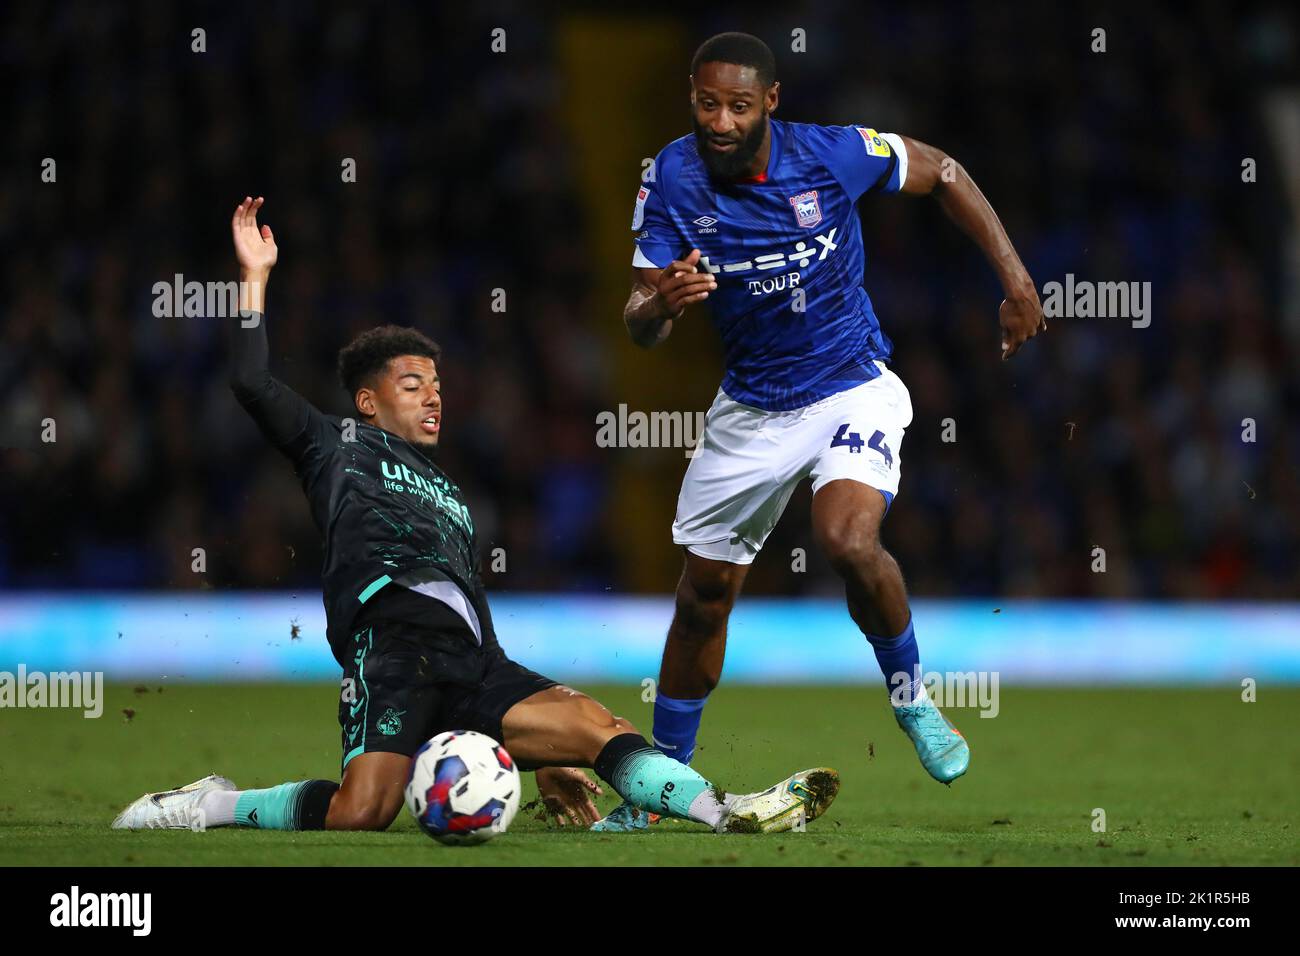 Janoi Donacien of Ipswich Town beats Sylvester Jasper of Bristol Rovers - Ipswich Town v Bristol Rovers, Sky Bet League One, Portman Road, Ipswich, UK - 13th September 2022  Editorial Use Only - DataCo restrictions apply Stock Photo